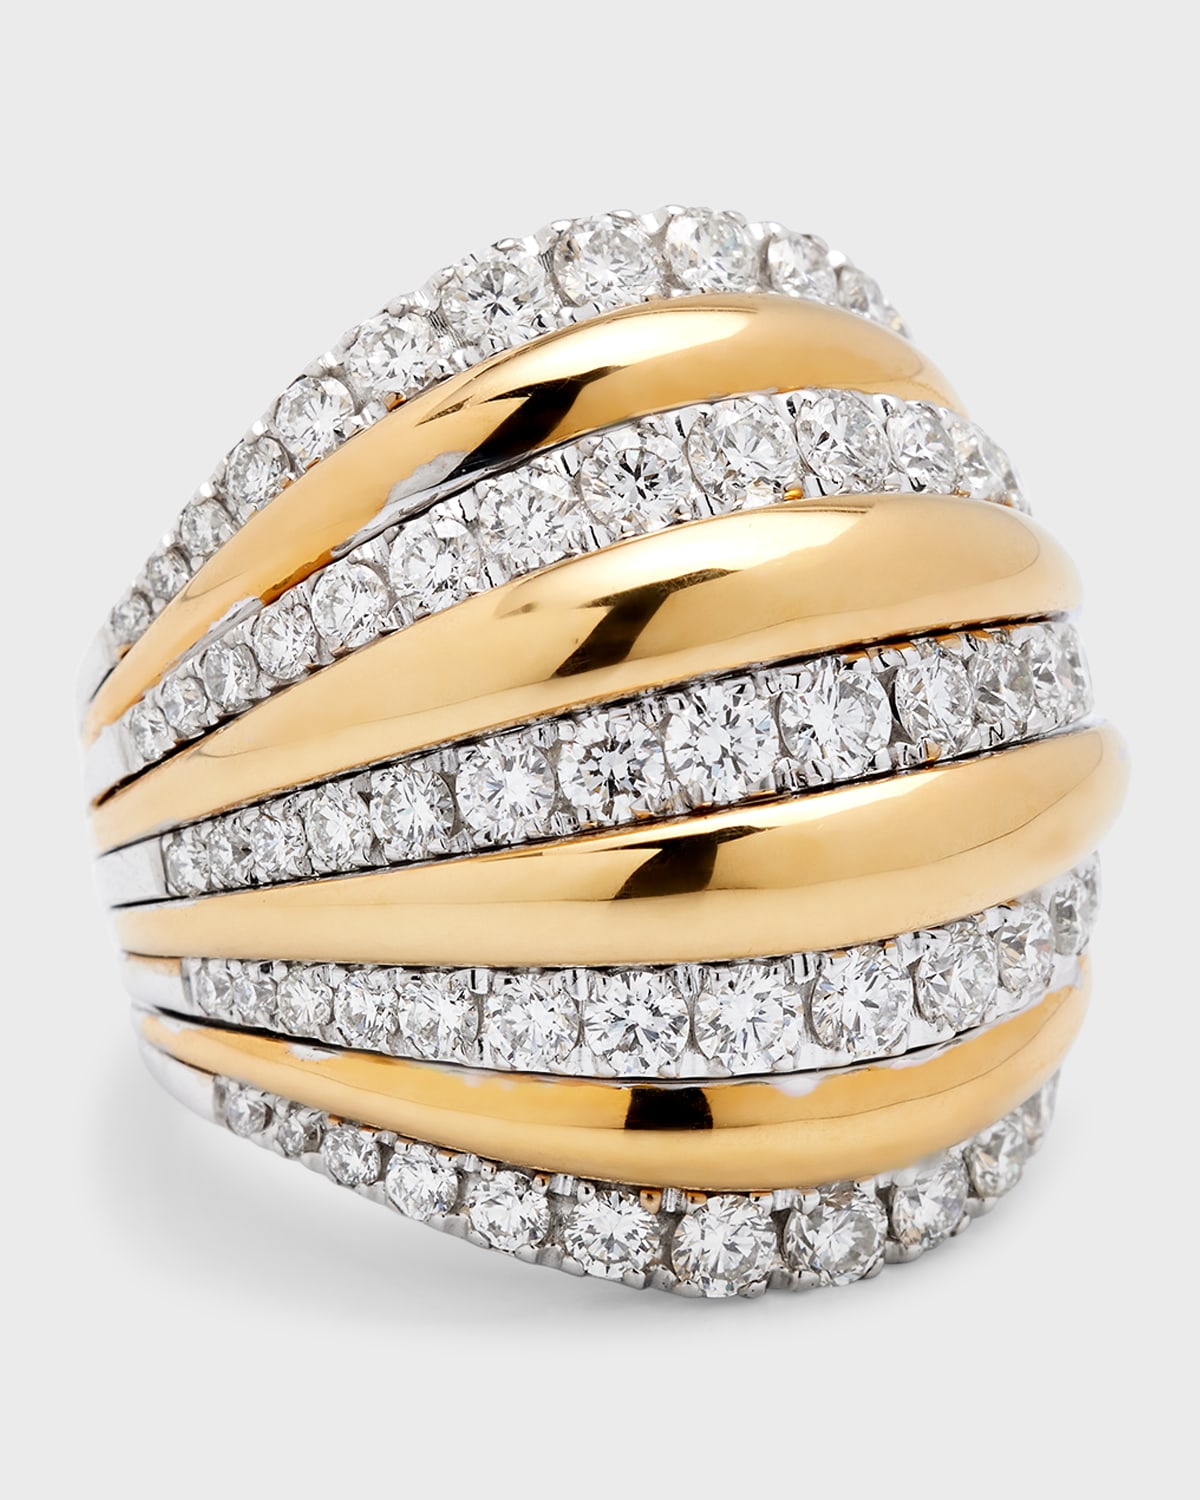 Leo Pizzo 18K White and Yellow Gold Fan Dome Ring with Pave Diamonds - Size 27